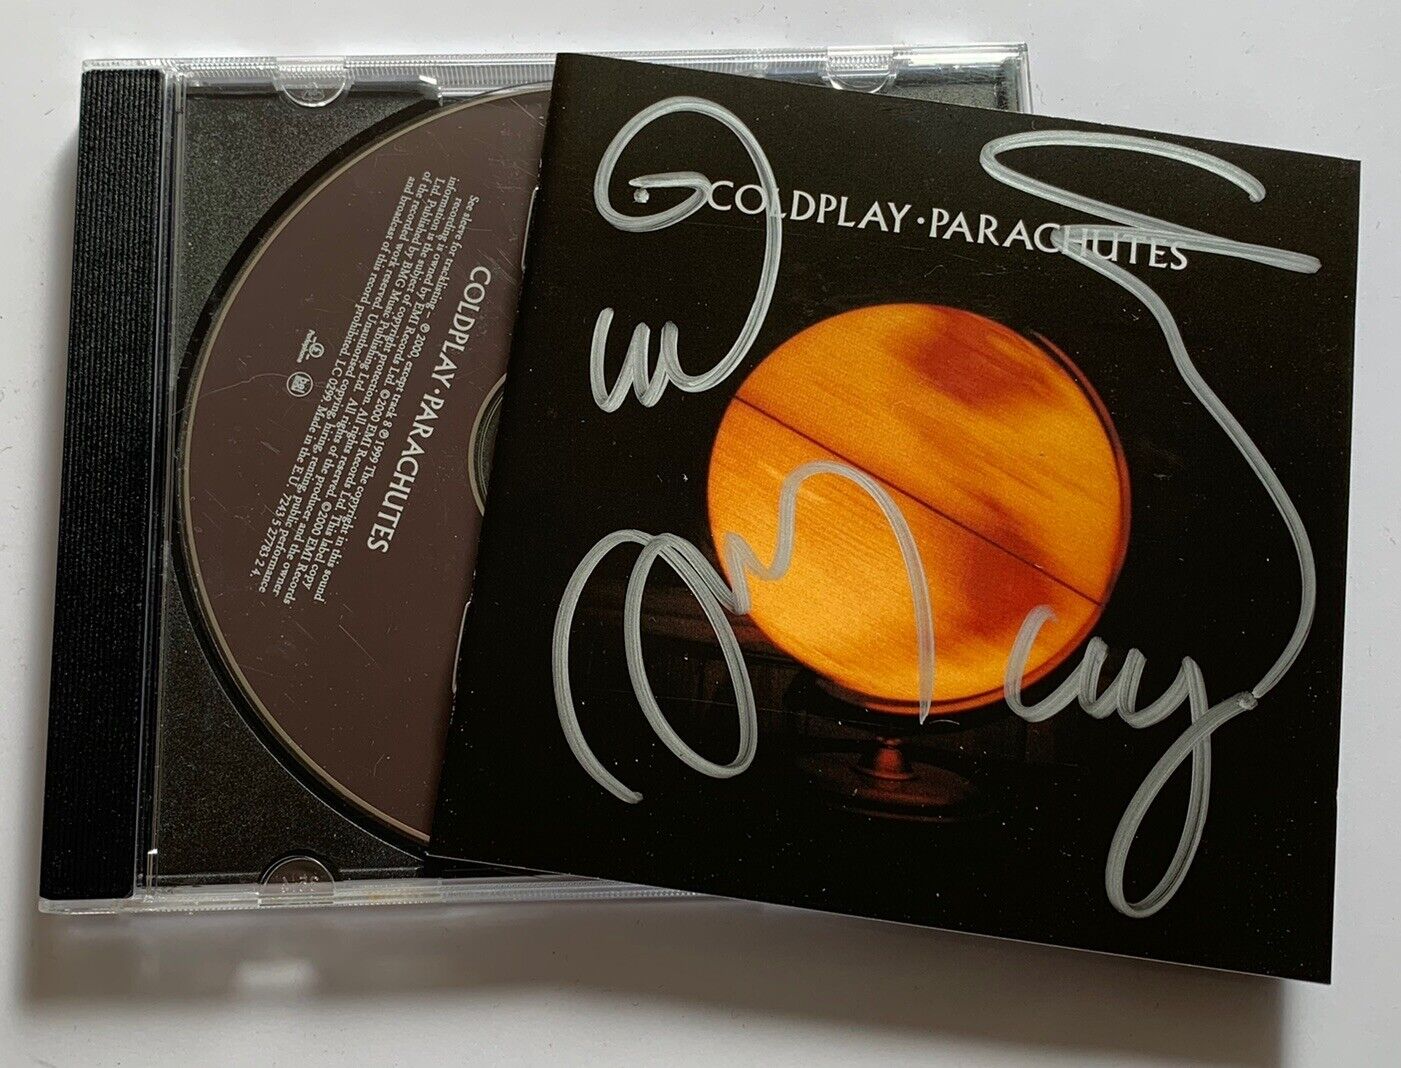 Coldplay Parachutes FULLY ( SIGNED AUTOGRAPHED ) Original Debut 2000 CD Album